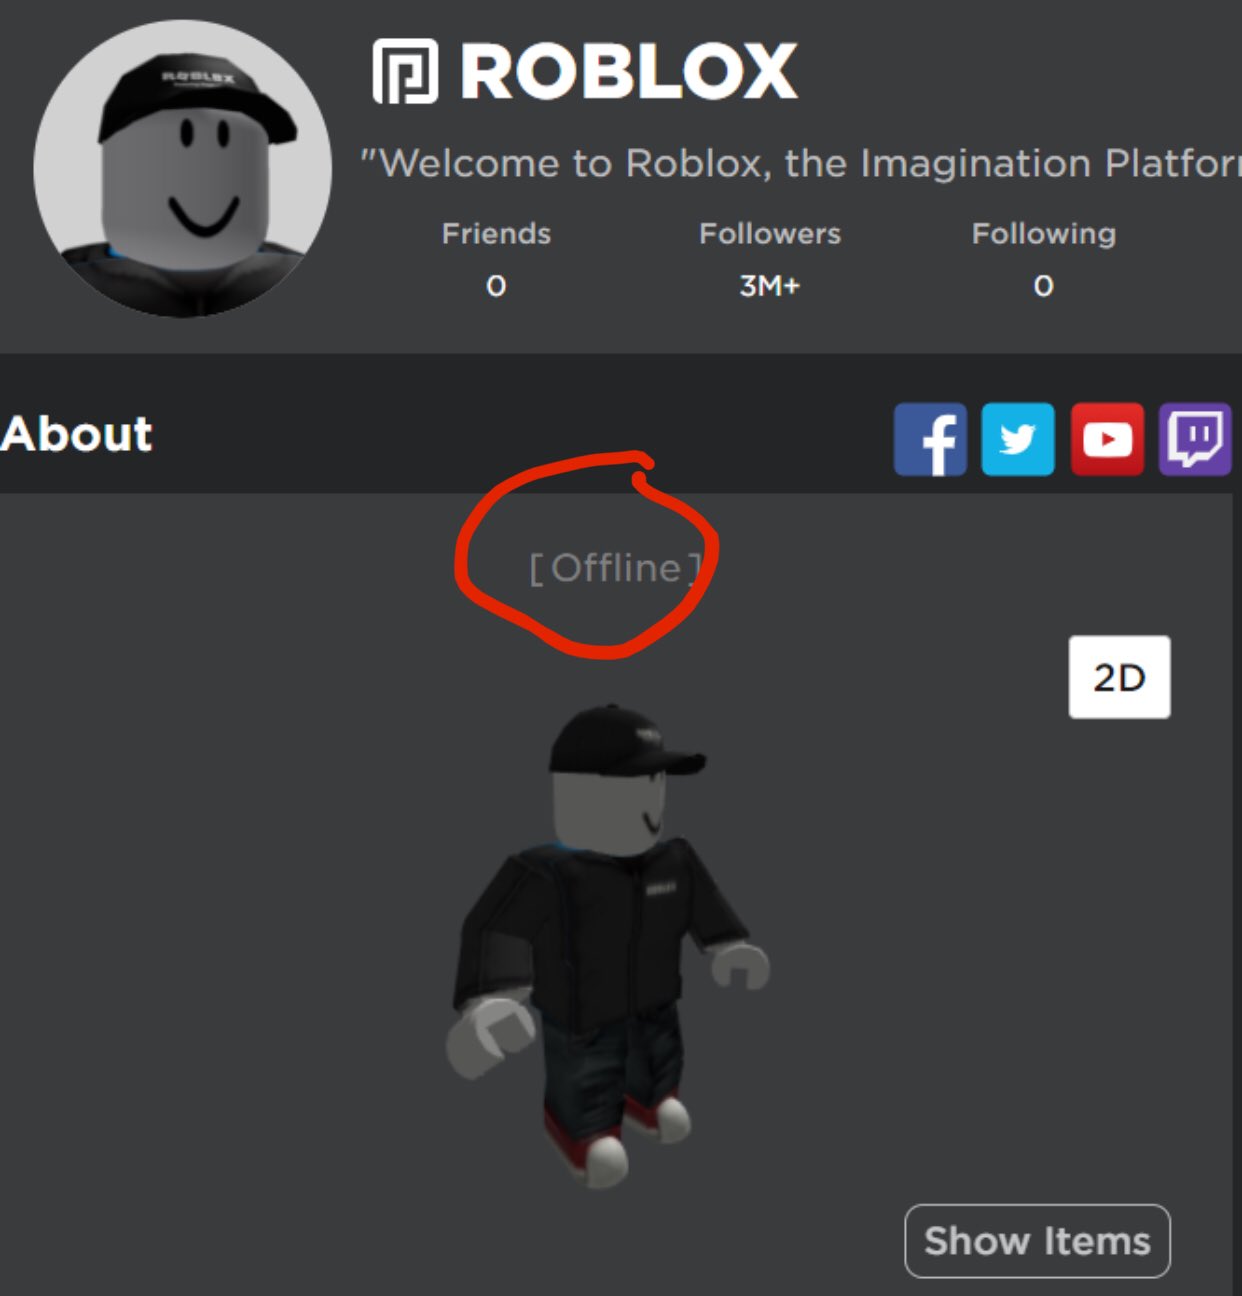 News Roblox On Twitter Roblox Is Offline Could This Mean The End - ant on twitter roblox being slow for anyone else right now i